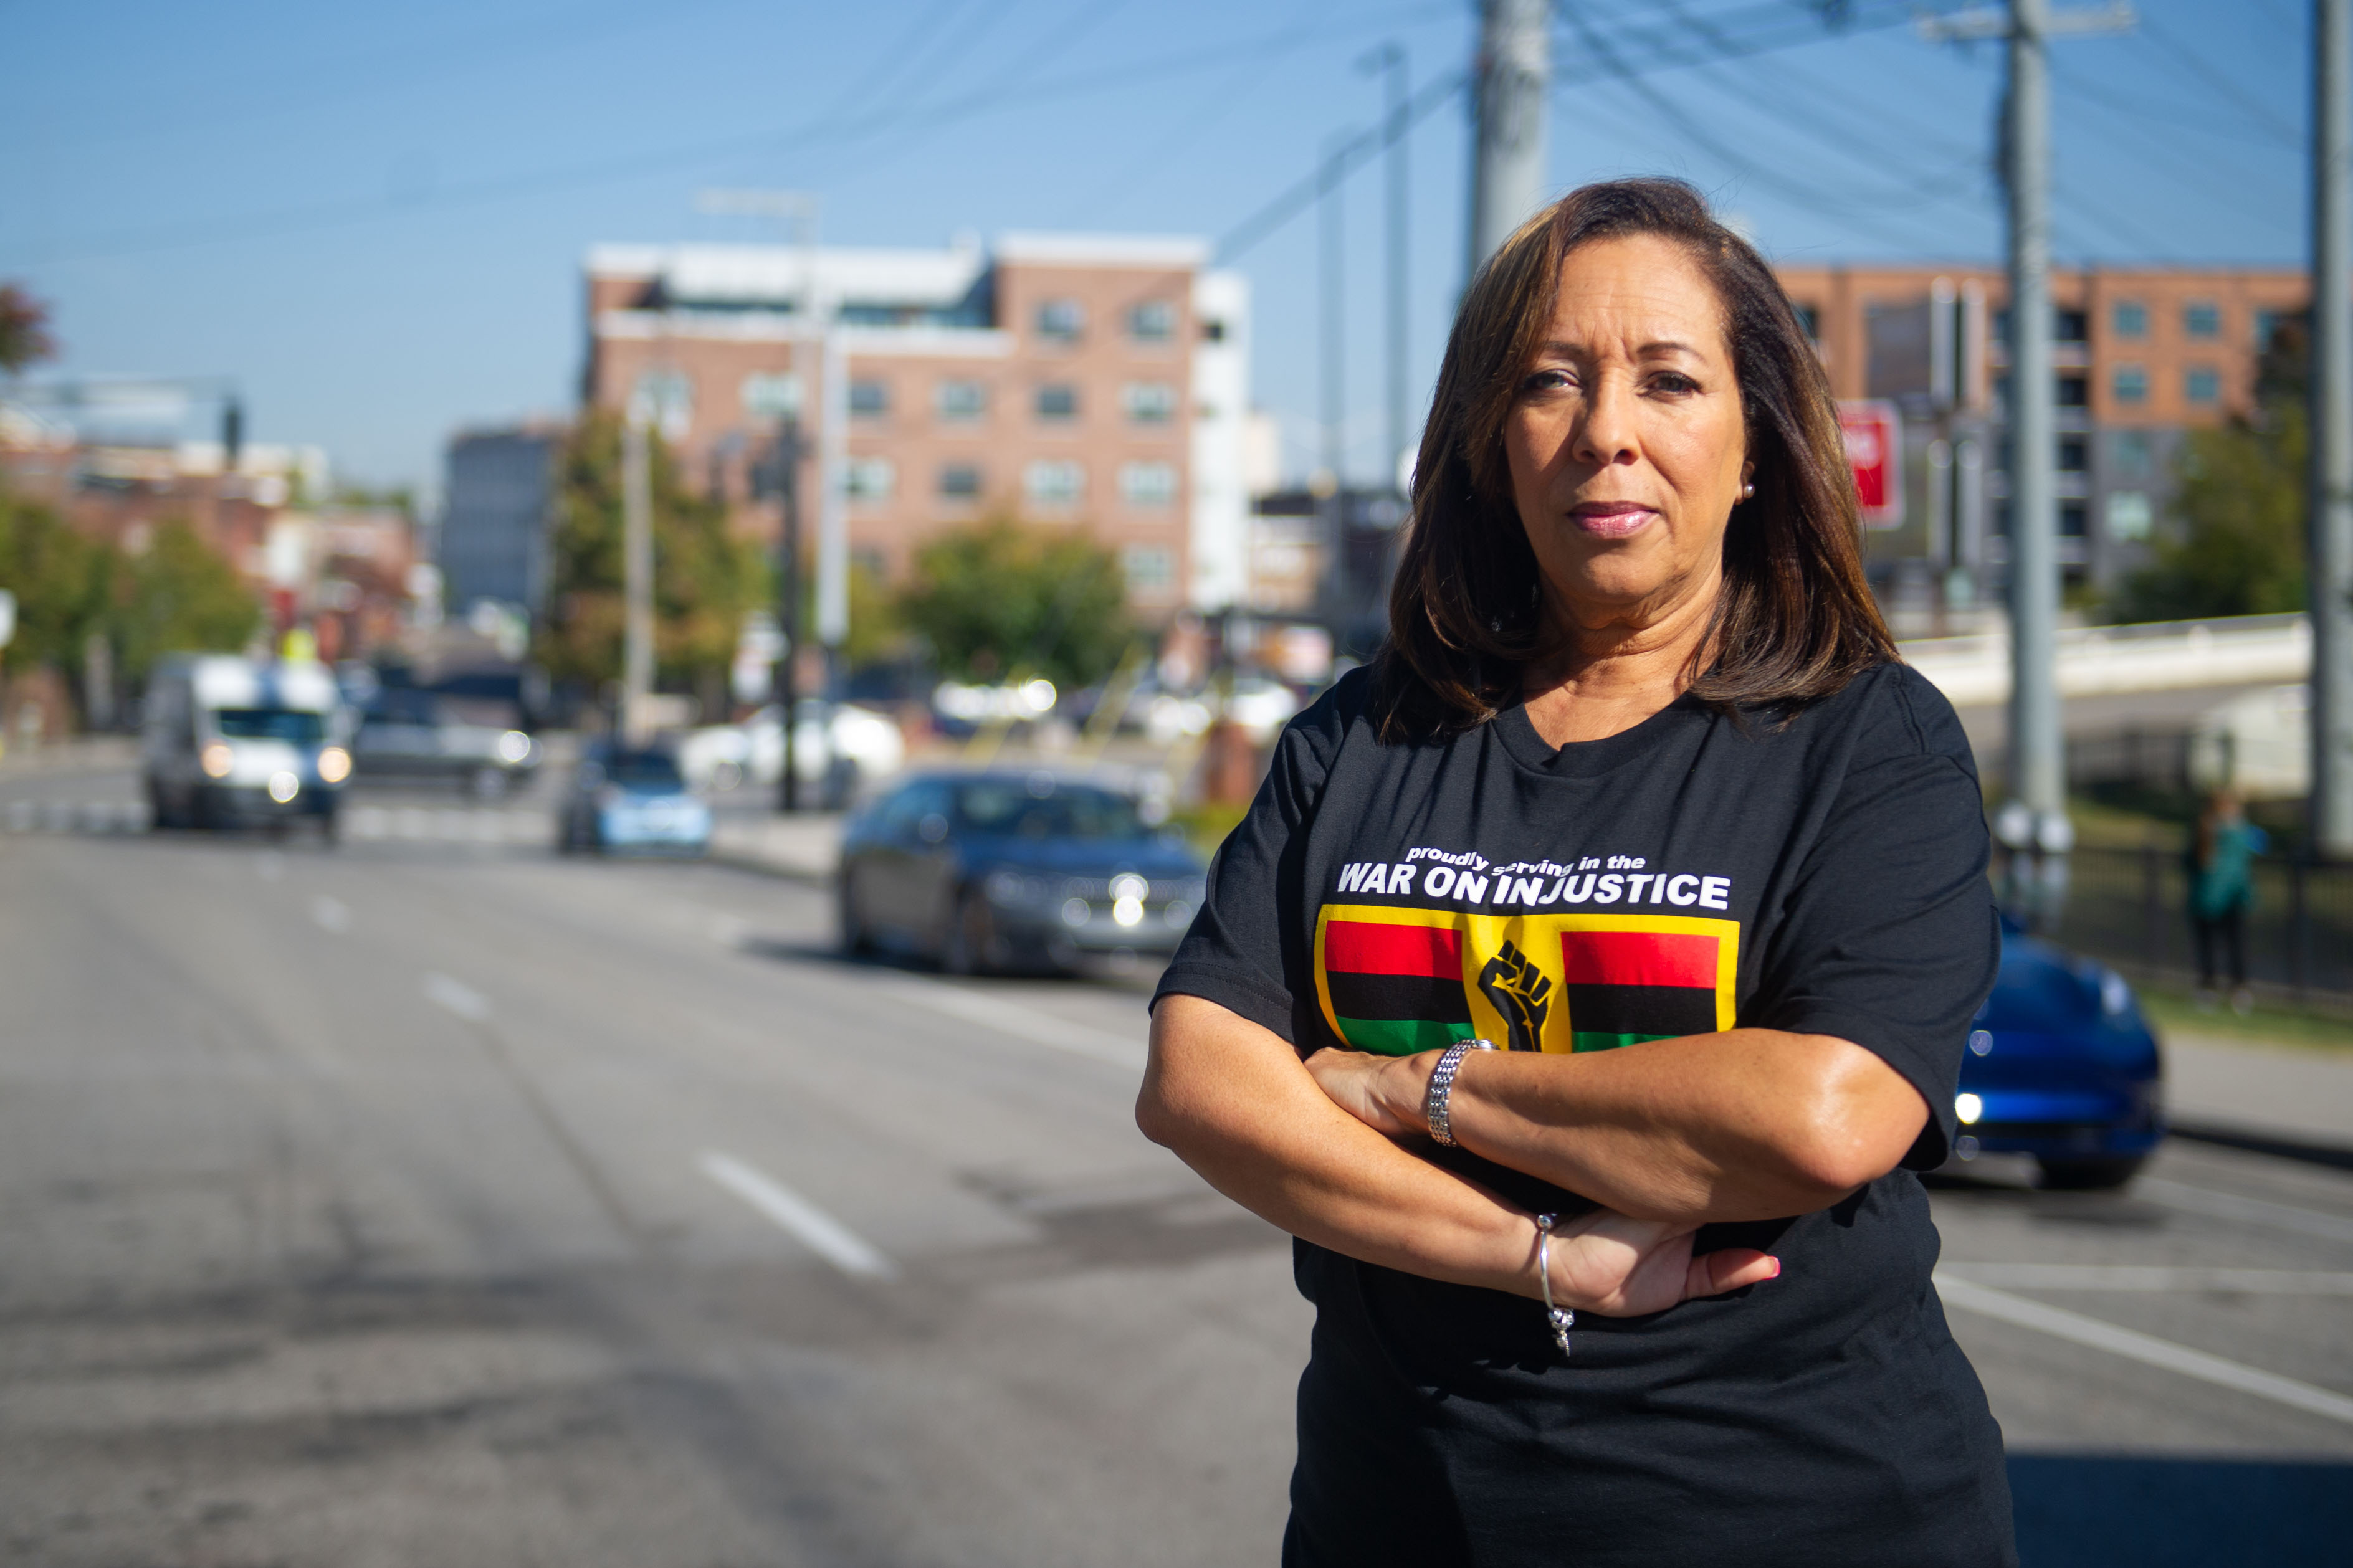 A Black woman wearing a T-shirt with the words "proudly striving in the WAR ON INJUSTICE" looks at the camera while standing beside a city street.